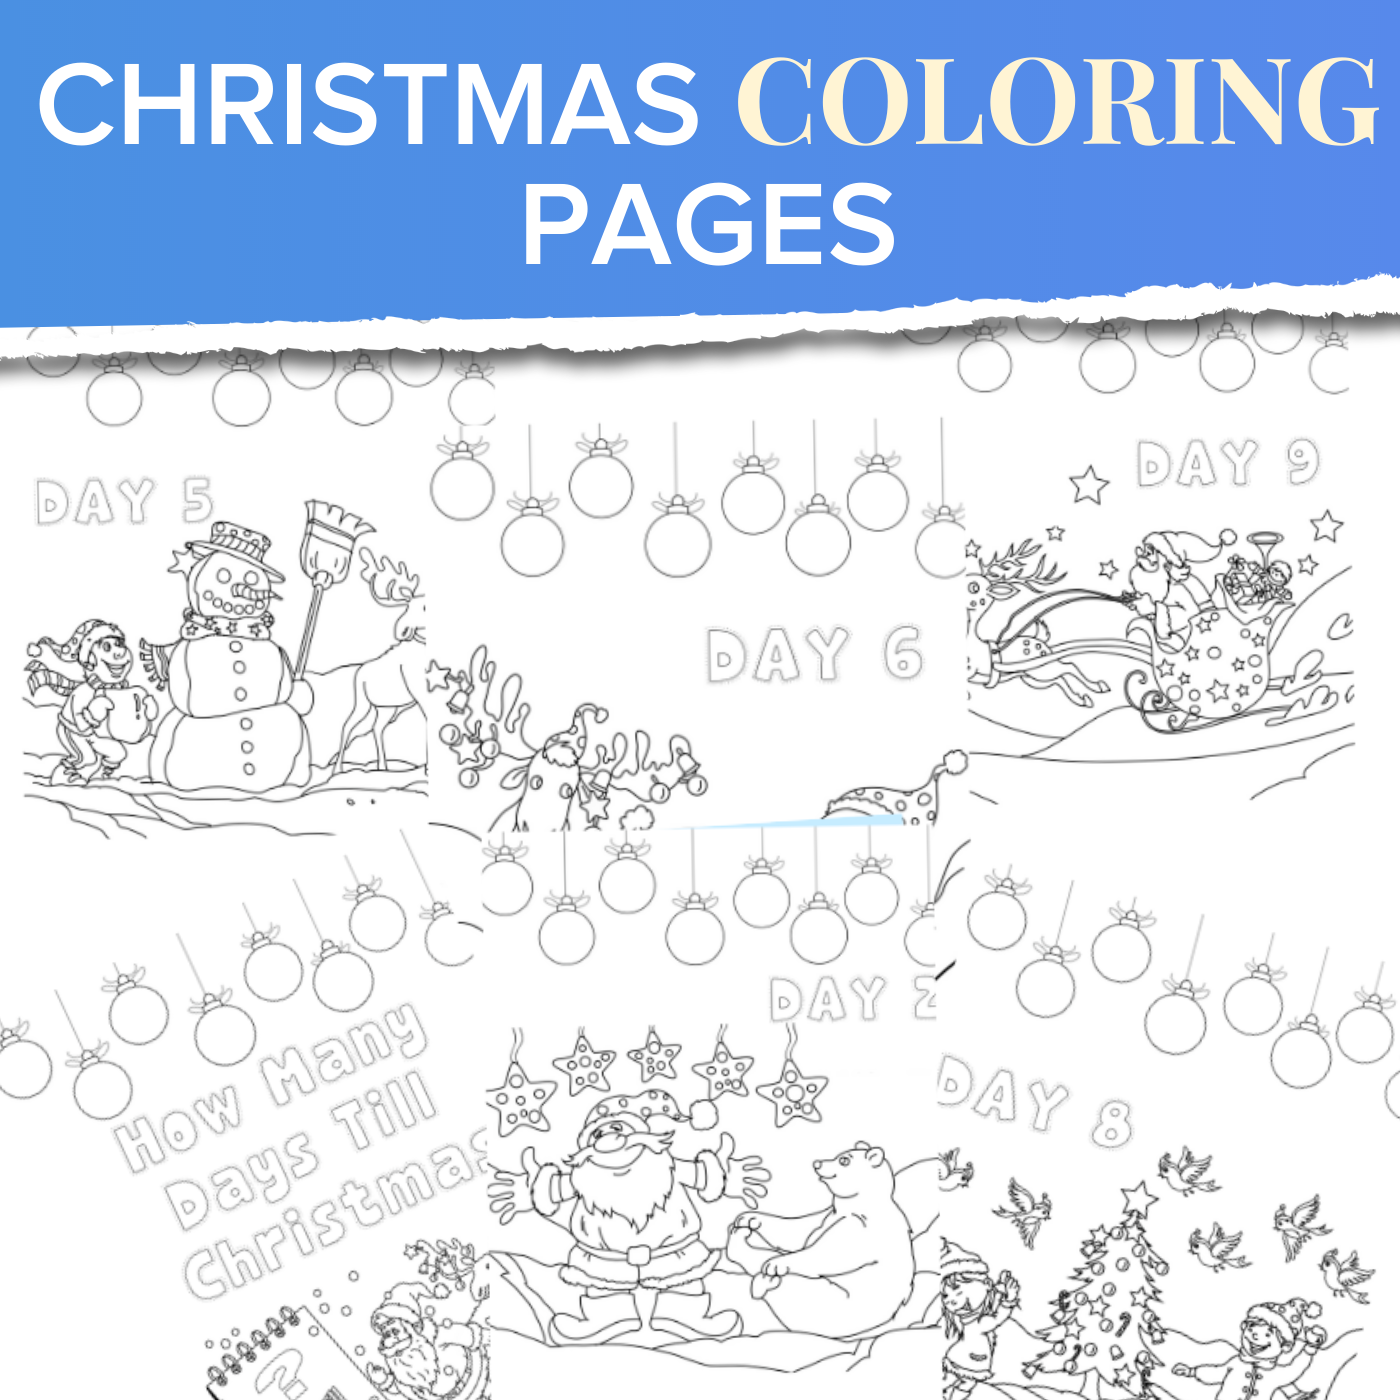 Christmas coloring pages â fine motor masters